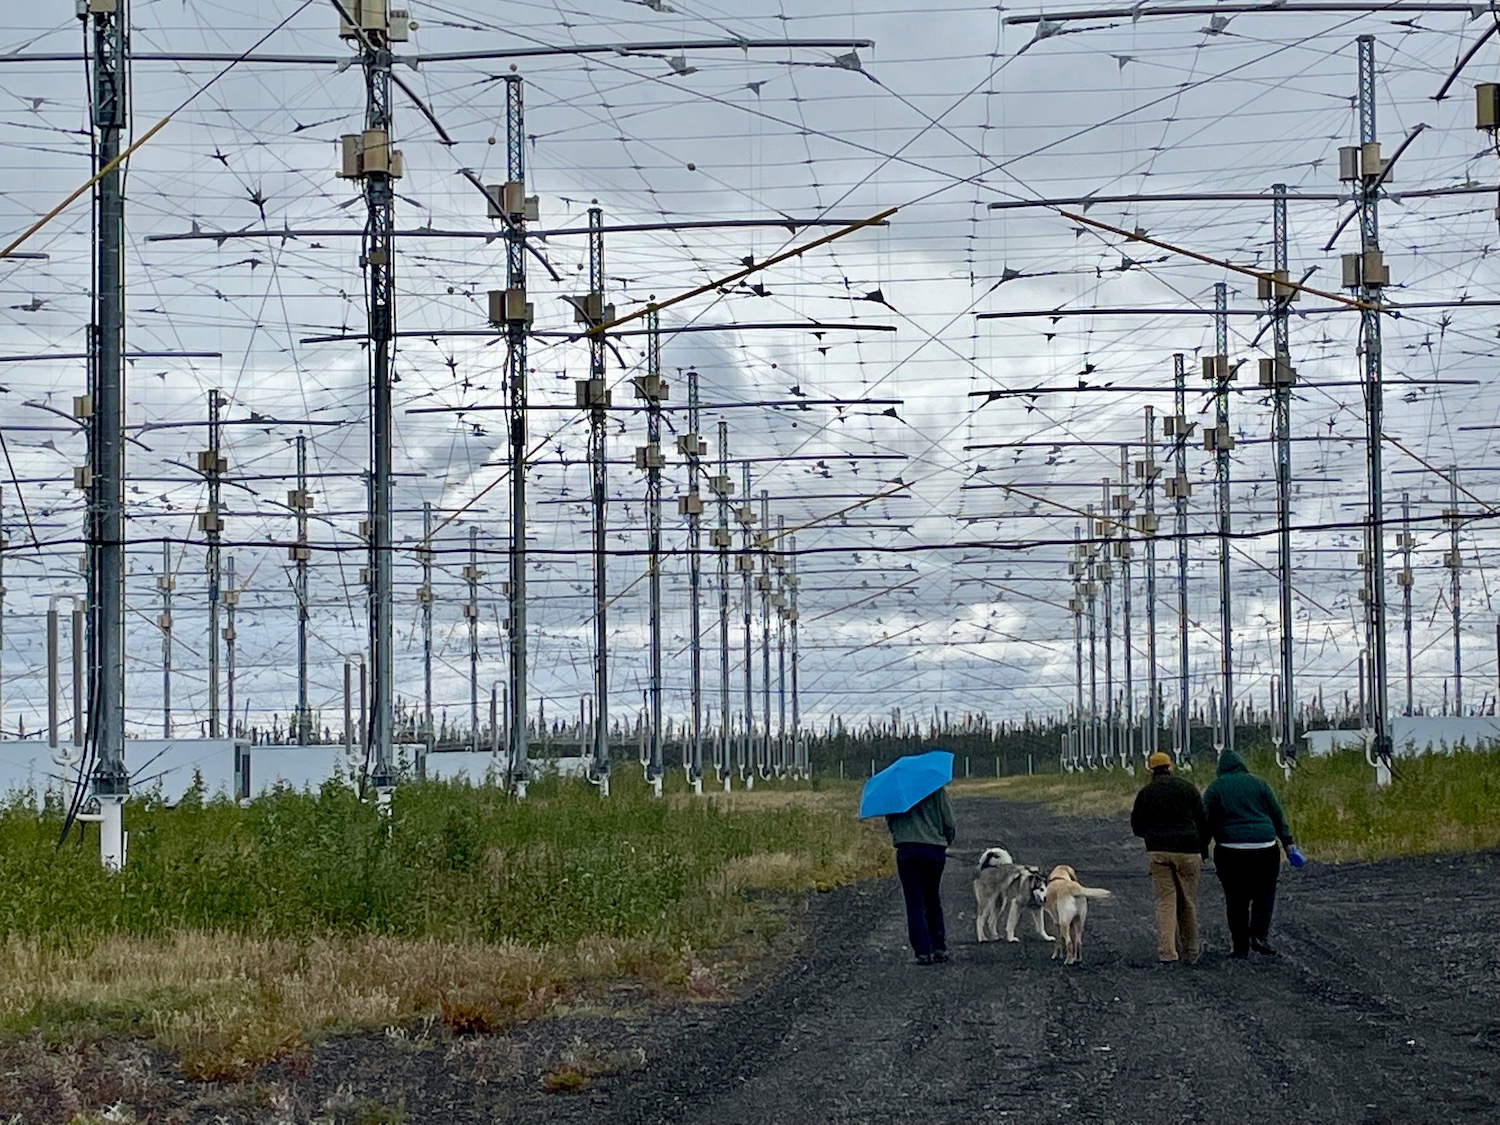 Several people walk with dogs along a gravel road between an array of antennas made from metal towers and wires.